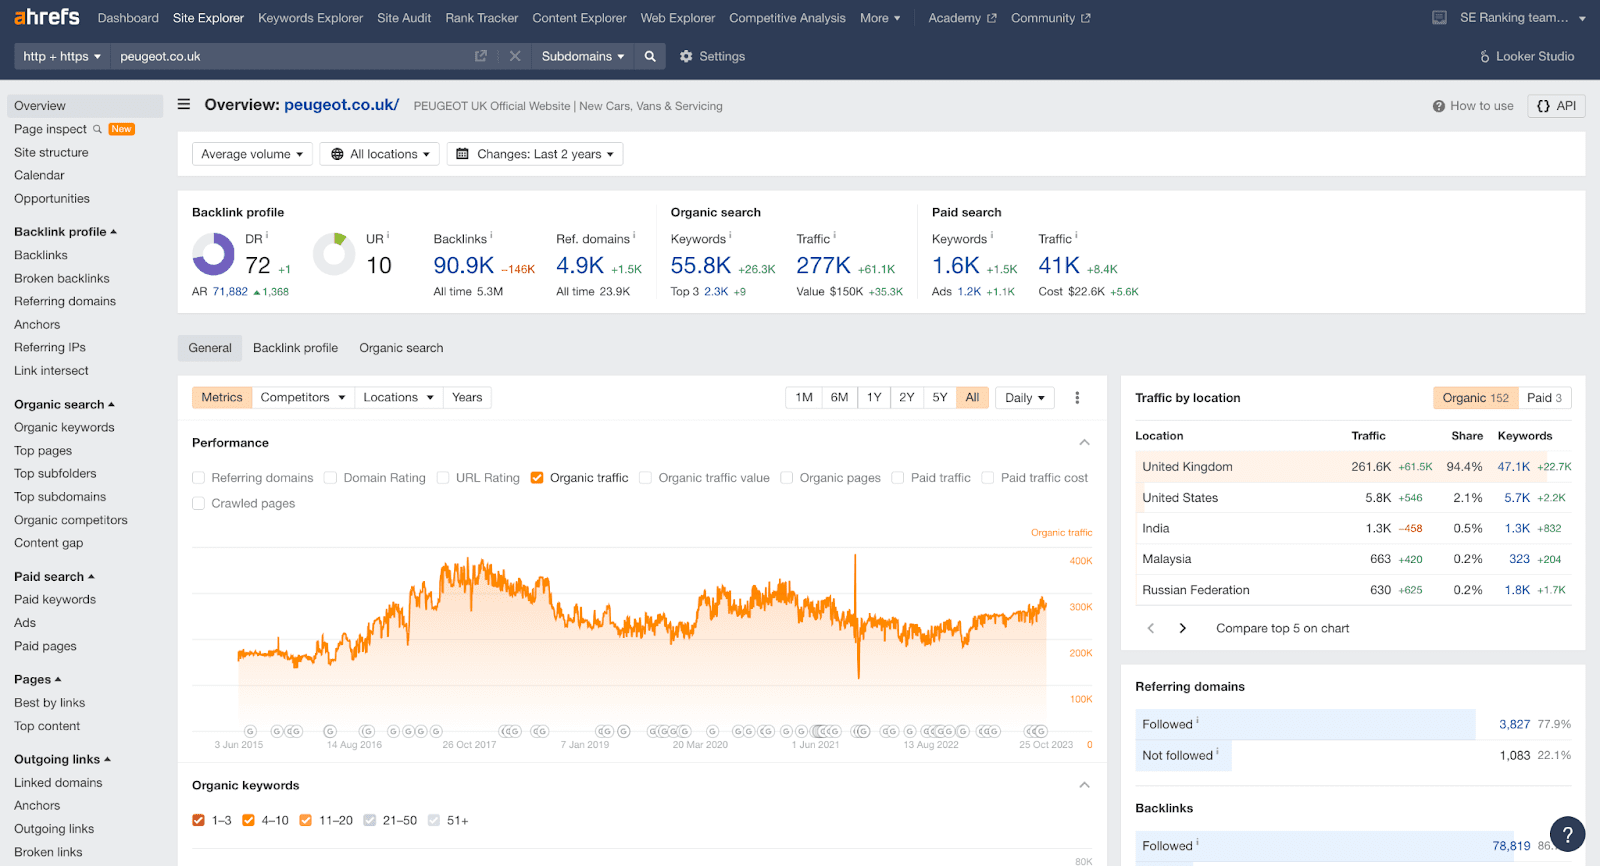 Ahrefs' competitive analysis features